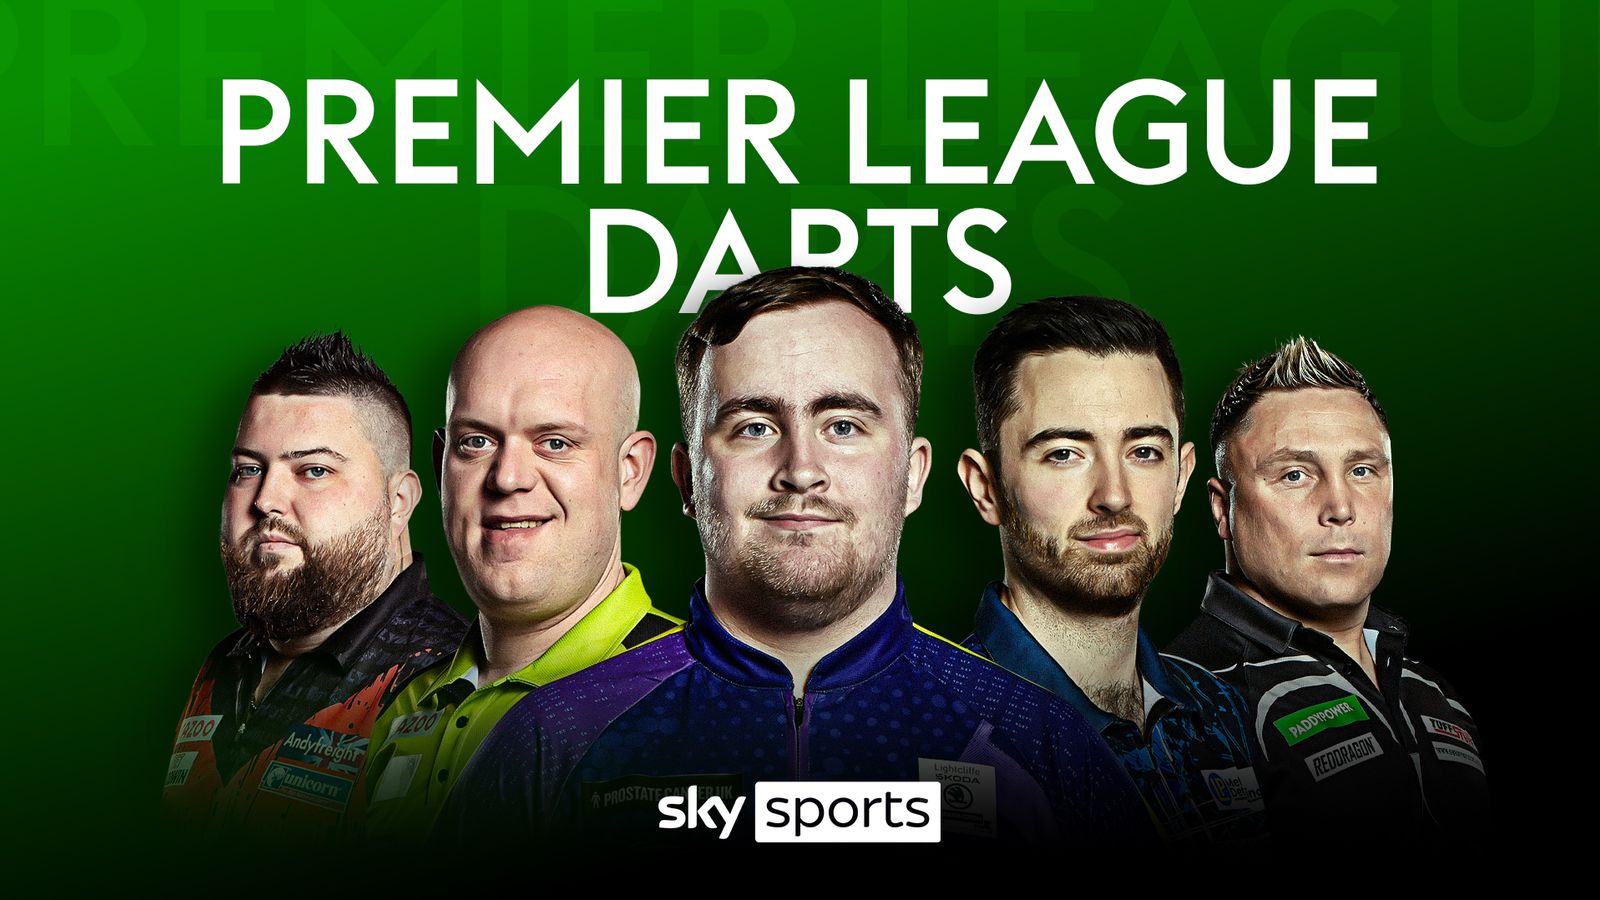 The Luke Littler effect and who will make the Premier League Darts Play-Offs? Michael van Gerwen to miss out?